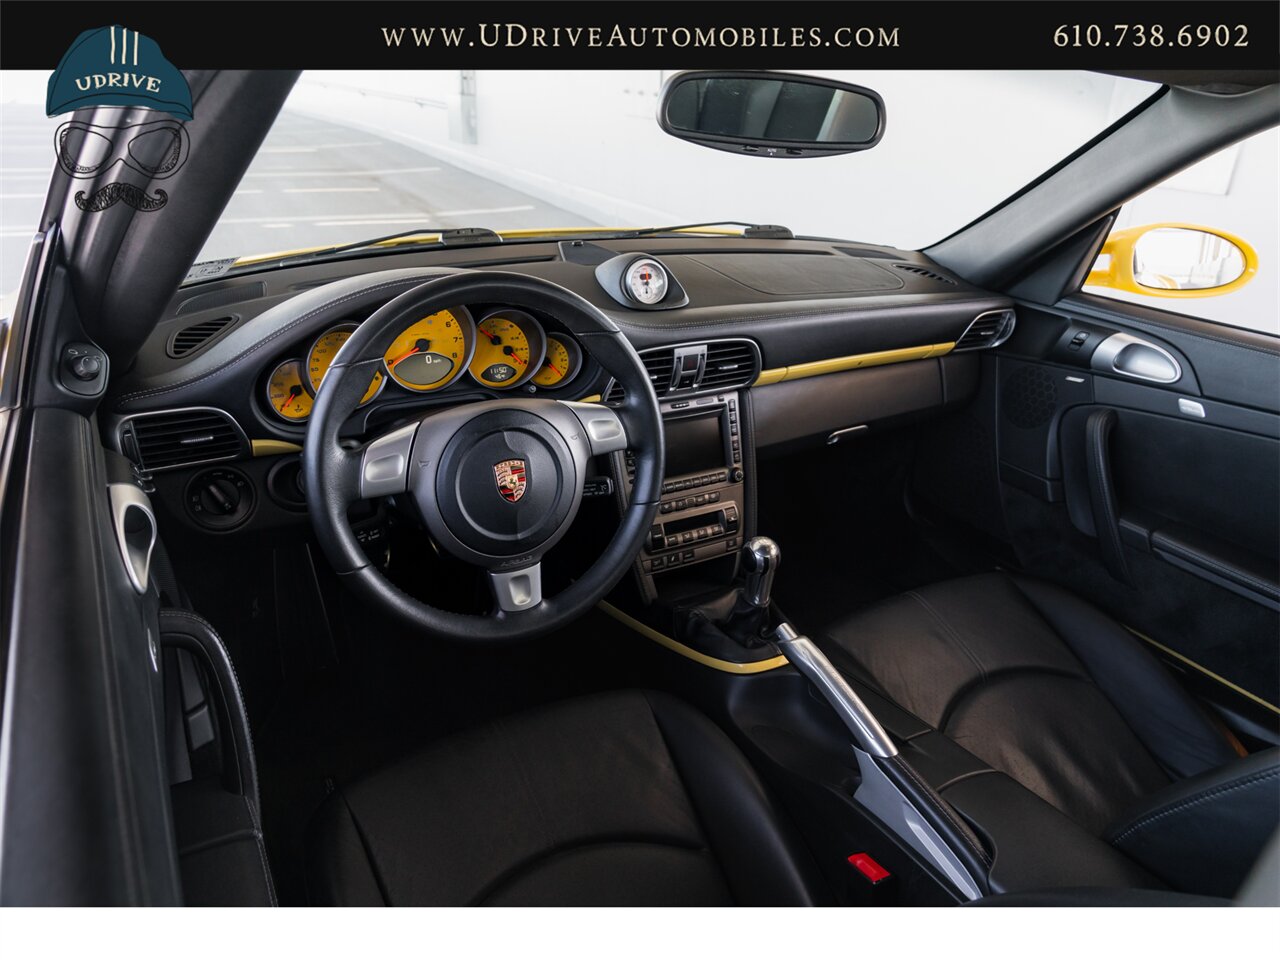 2007 Porsche 911 Carrera 4S 997 C4S Paint To Sample Pastel Yellow  6 Speed Sport Chrono Full Leather Yellow Gauges - Photo 30 - West Chester, PA 19382